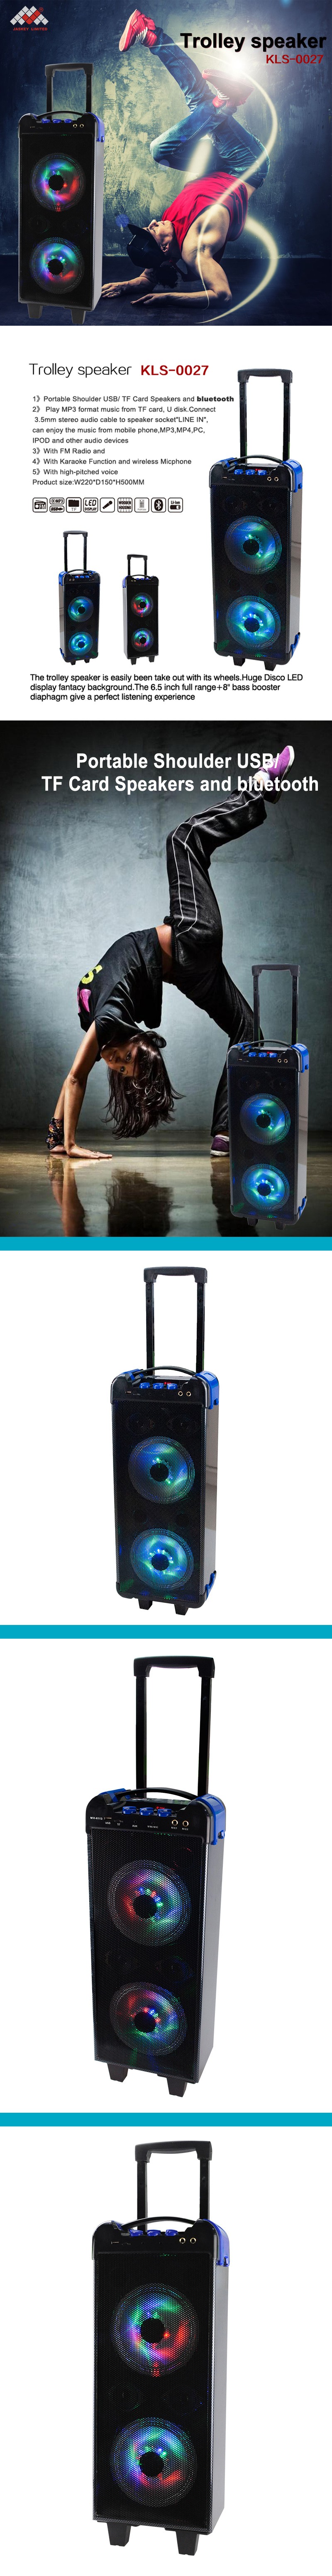 Portable Party Speakers